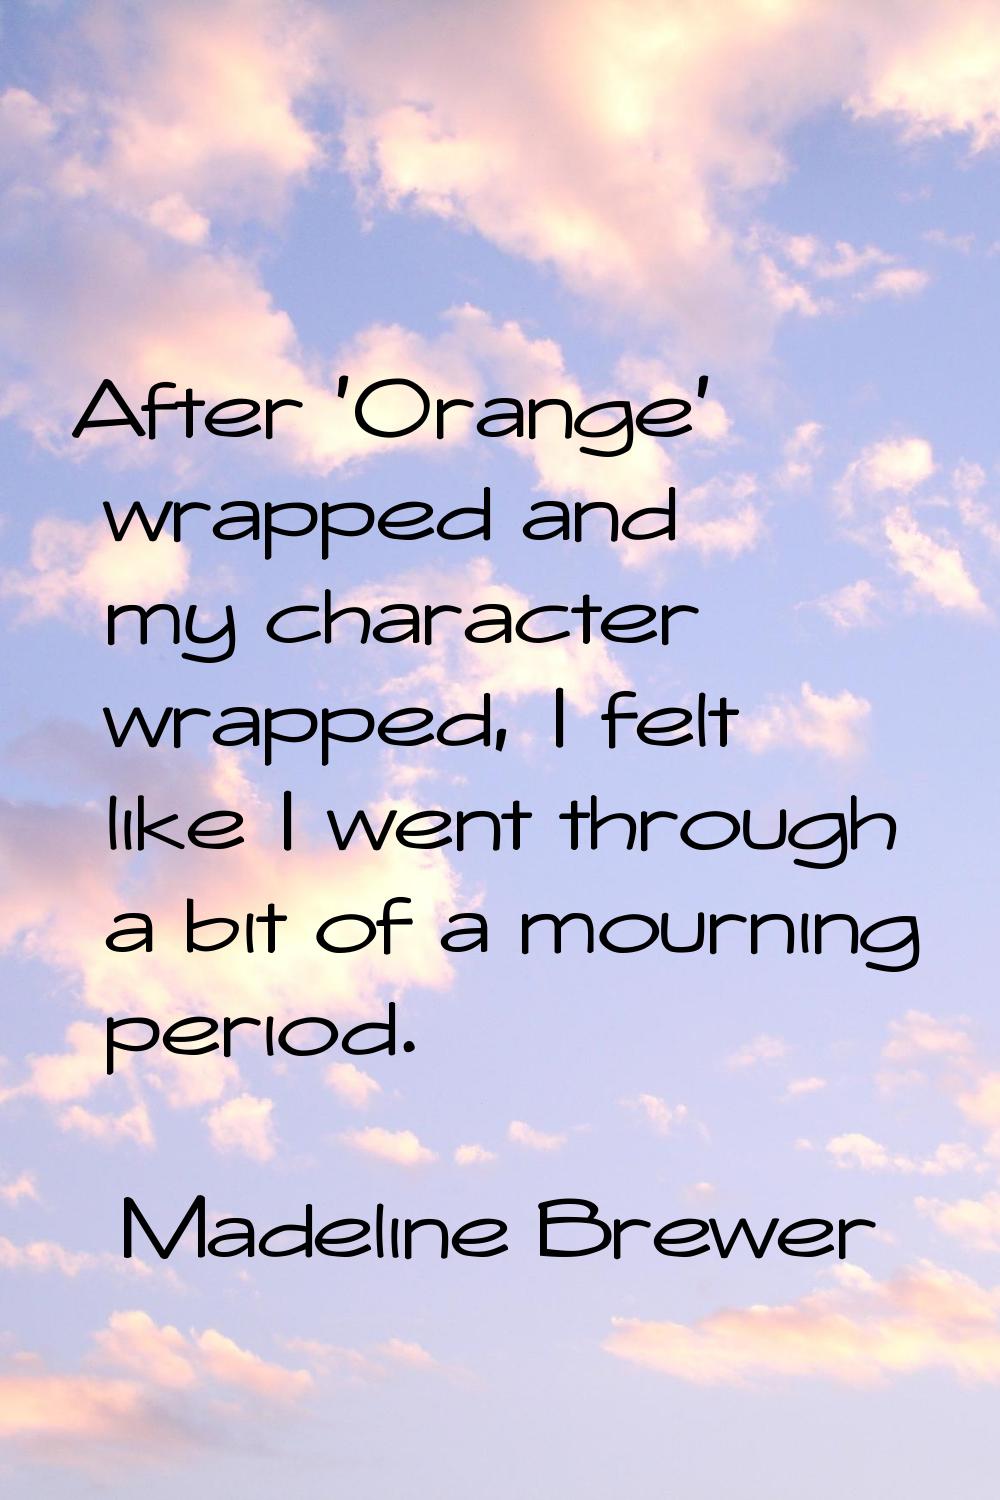 After 'Orange' wrapped and my character wrapped, I felt like I went through a bit of a mourning per